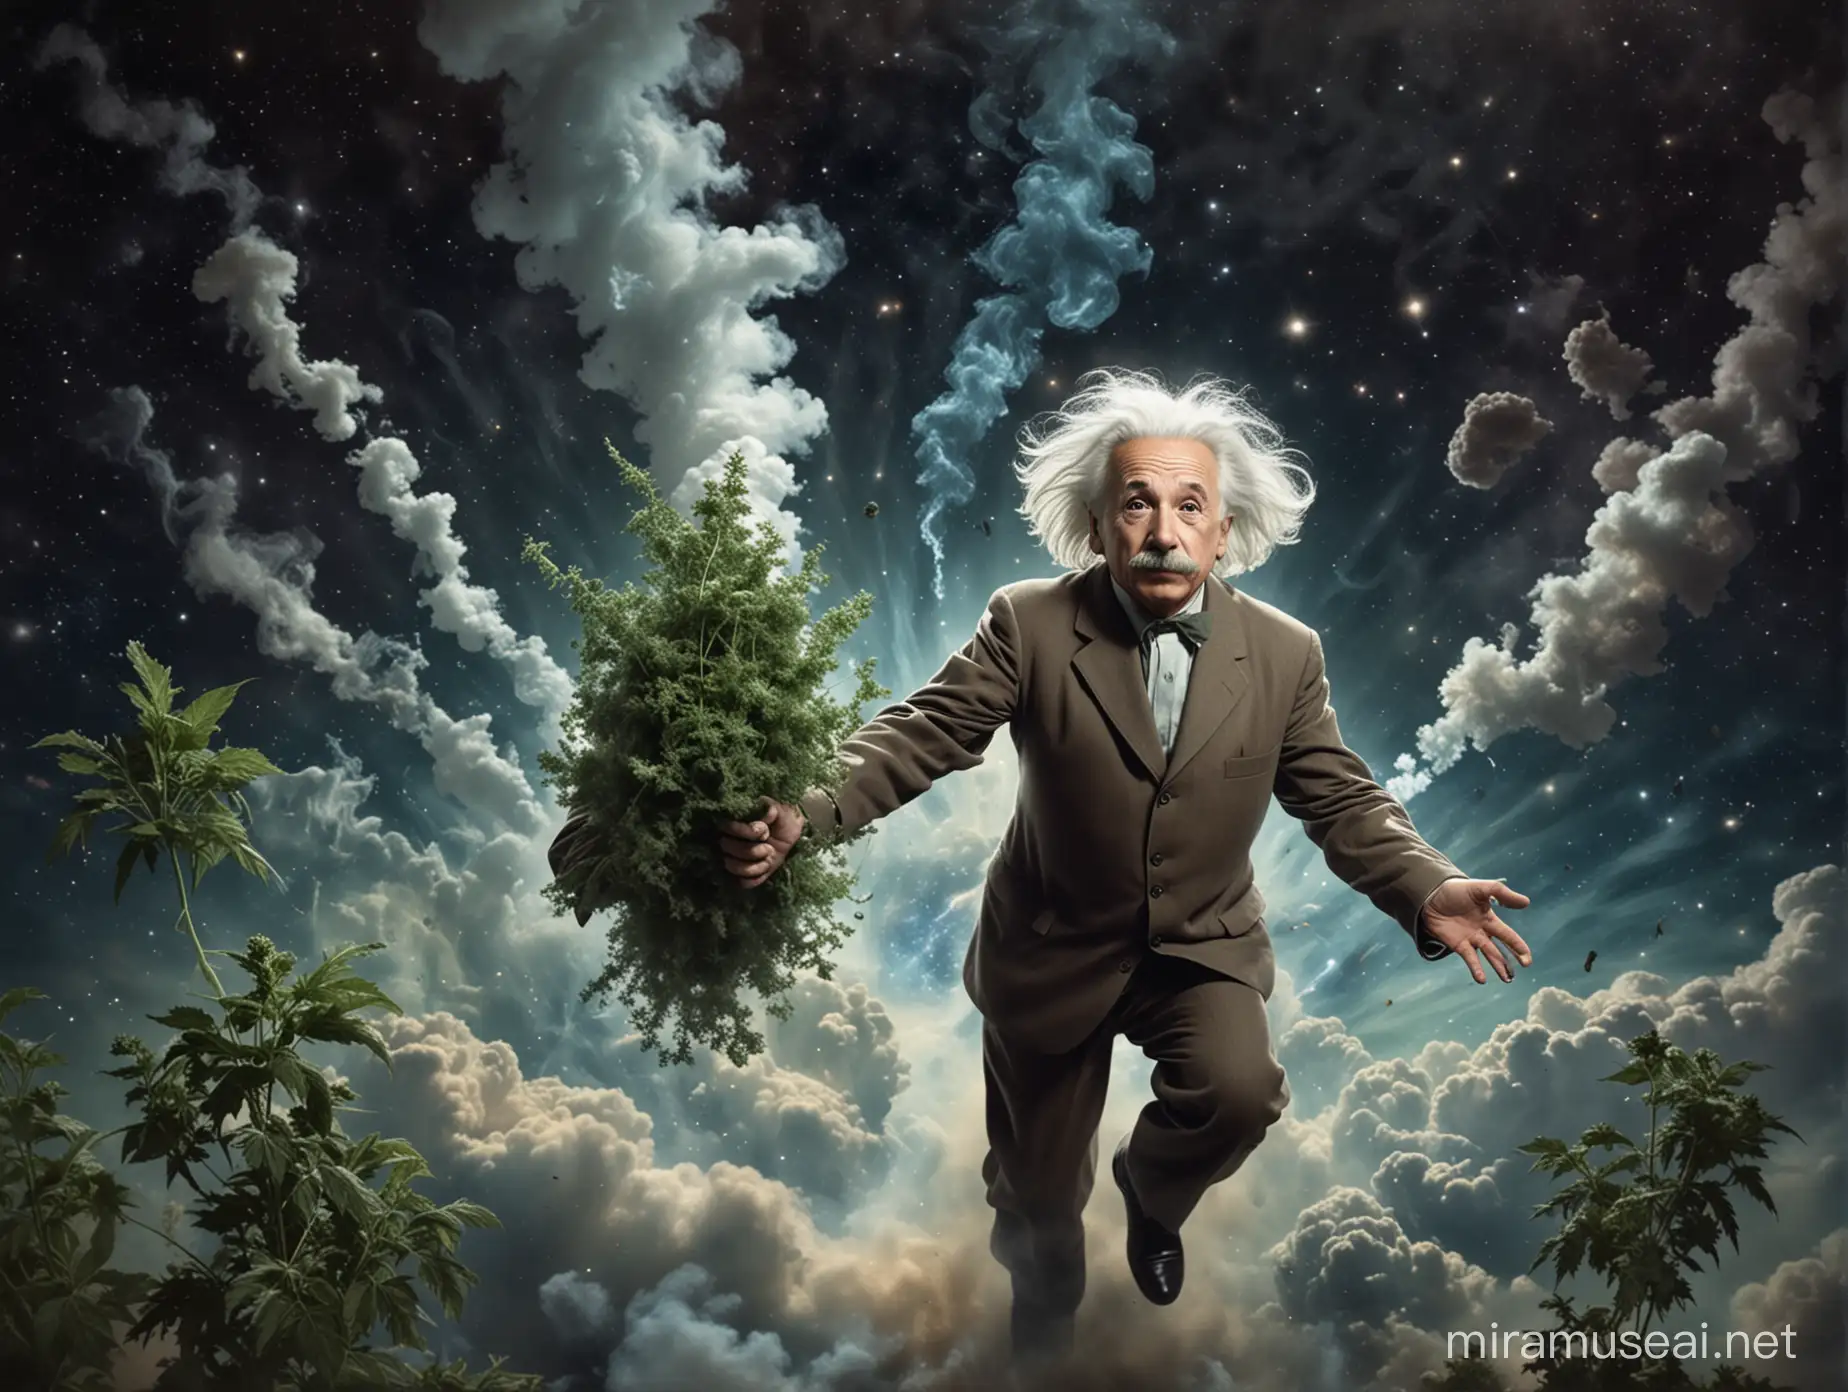 Einstein levitating in space, surrounded by weed and smoke